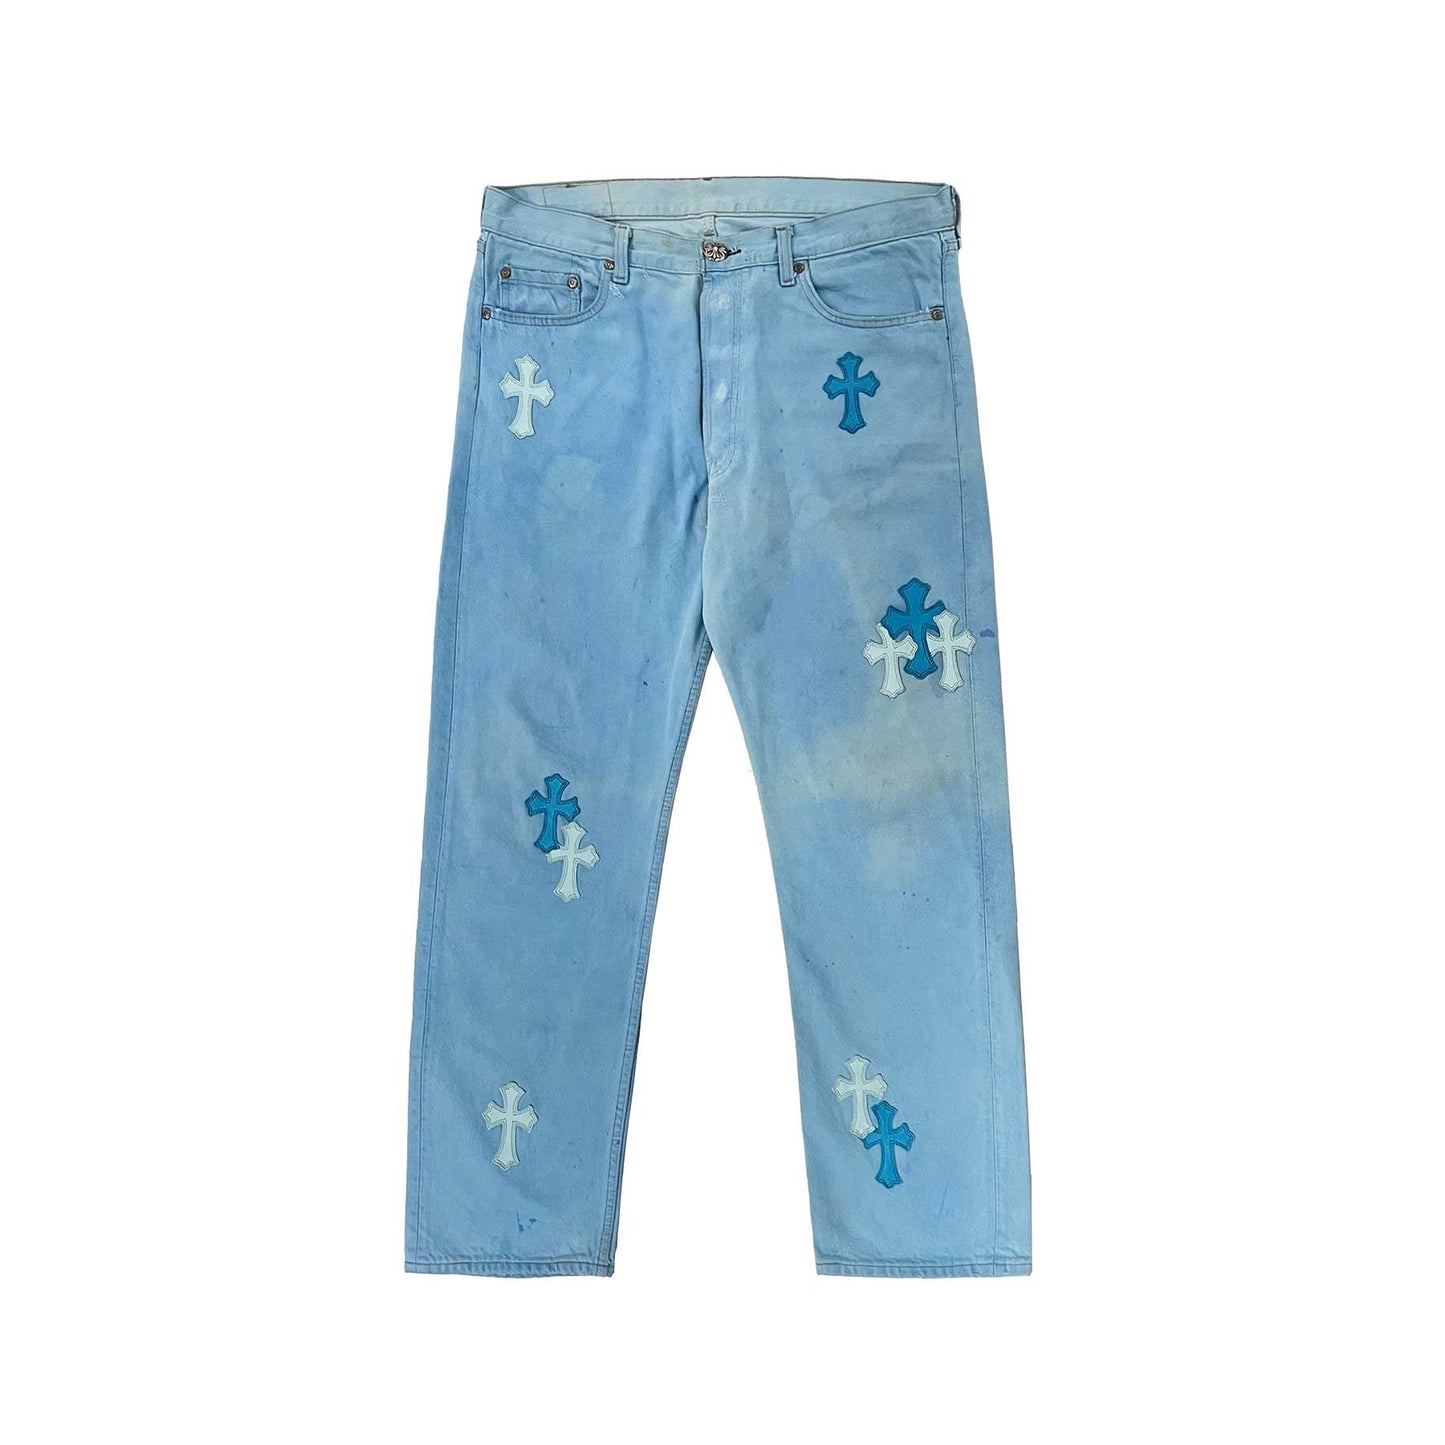 Chrome Hearts Archive Drake Blue Leather Cross Patch Jeans - SHENGLI ROAD MARKET